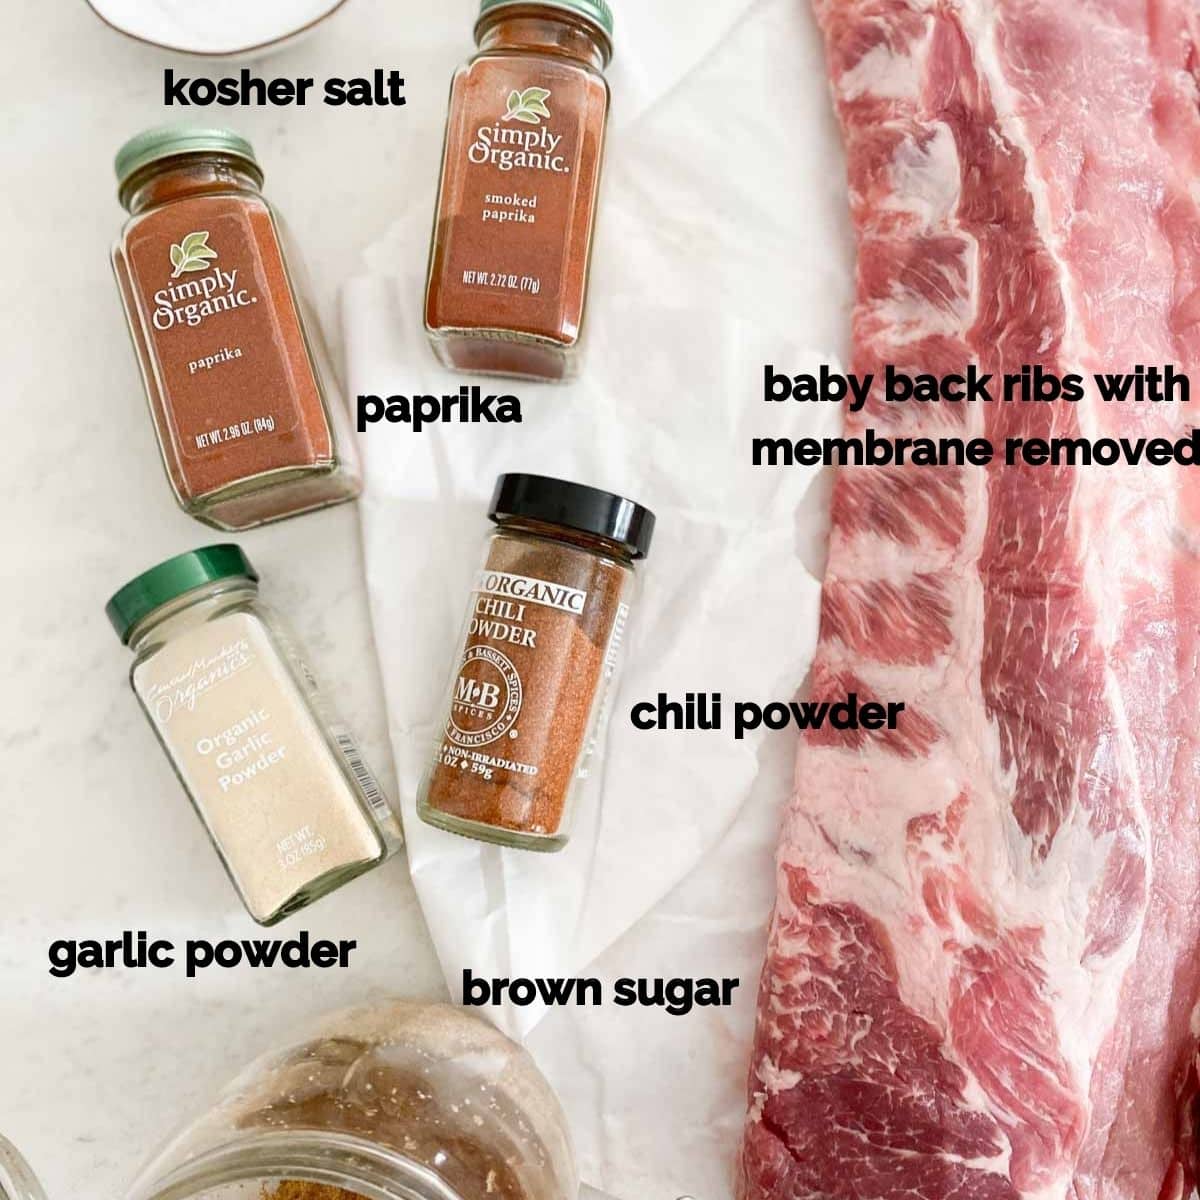 Salt, paprika, chili powder, and other dry rub ingredients for ribs on a table